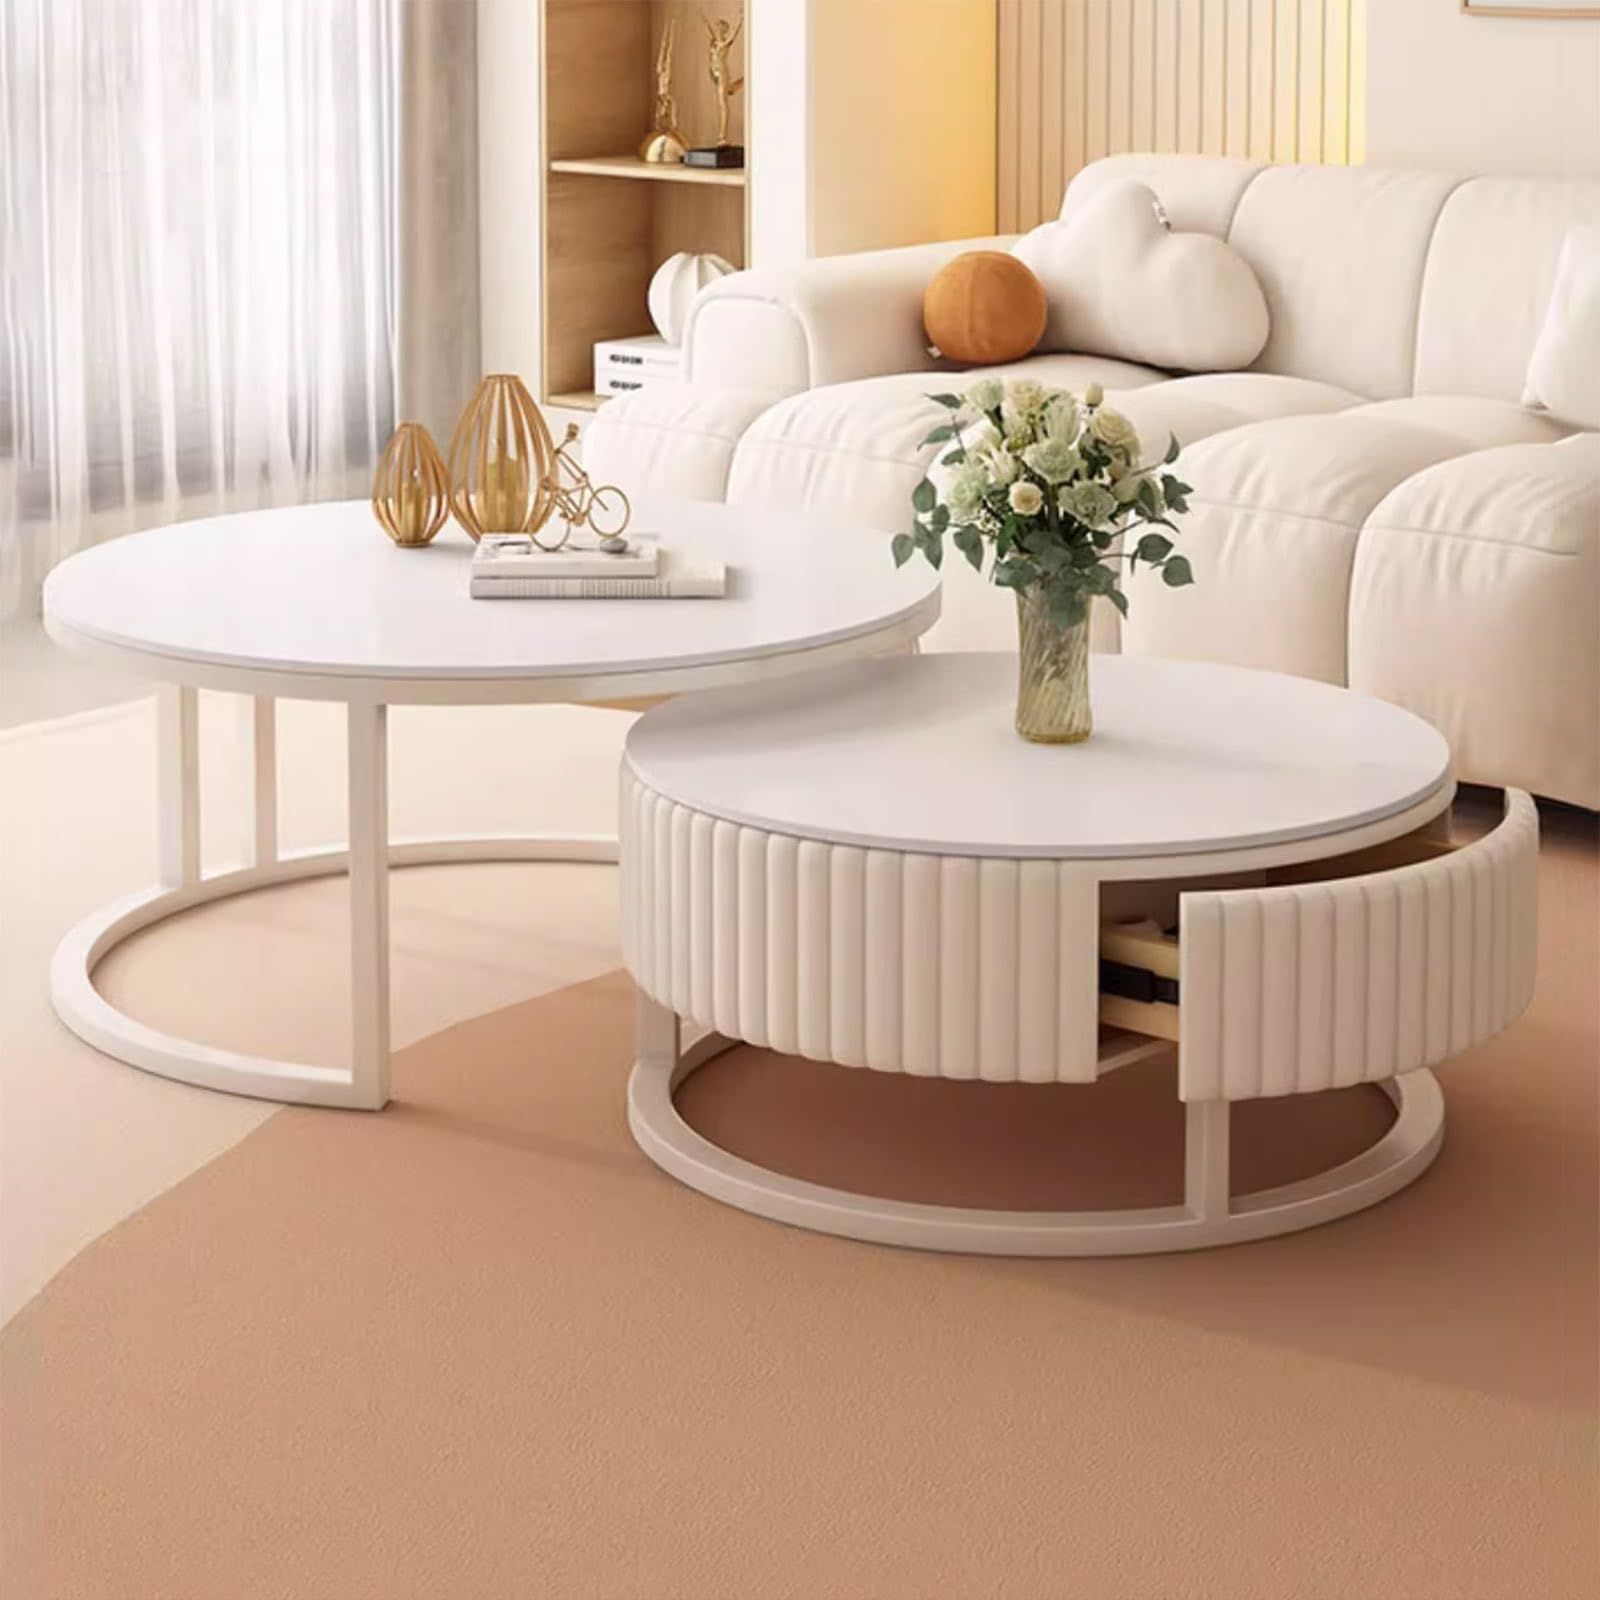 Round Coffee Tables With Storage With Newest Amazon: Coffee Table White Simple Modern Round Coffee Table With Storage  Drawers Coffee Tables For Living Room 2 In 1 Coffee Table Set Durable Metal  Frame Easy Assembly(diameter: 27.5"/ (View 2 of 10)